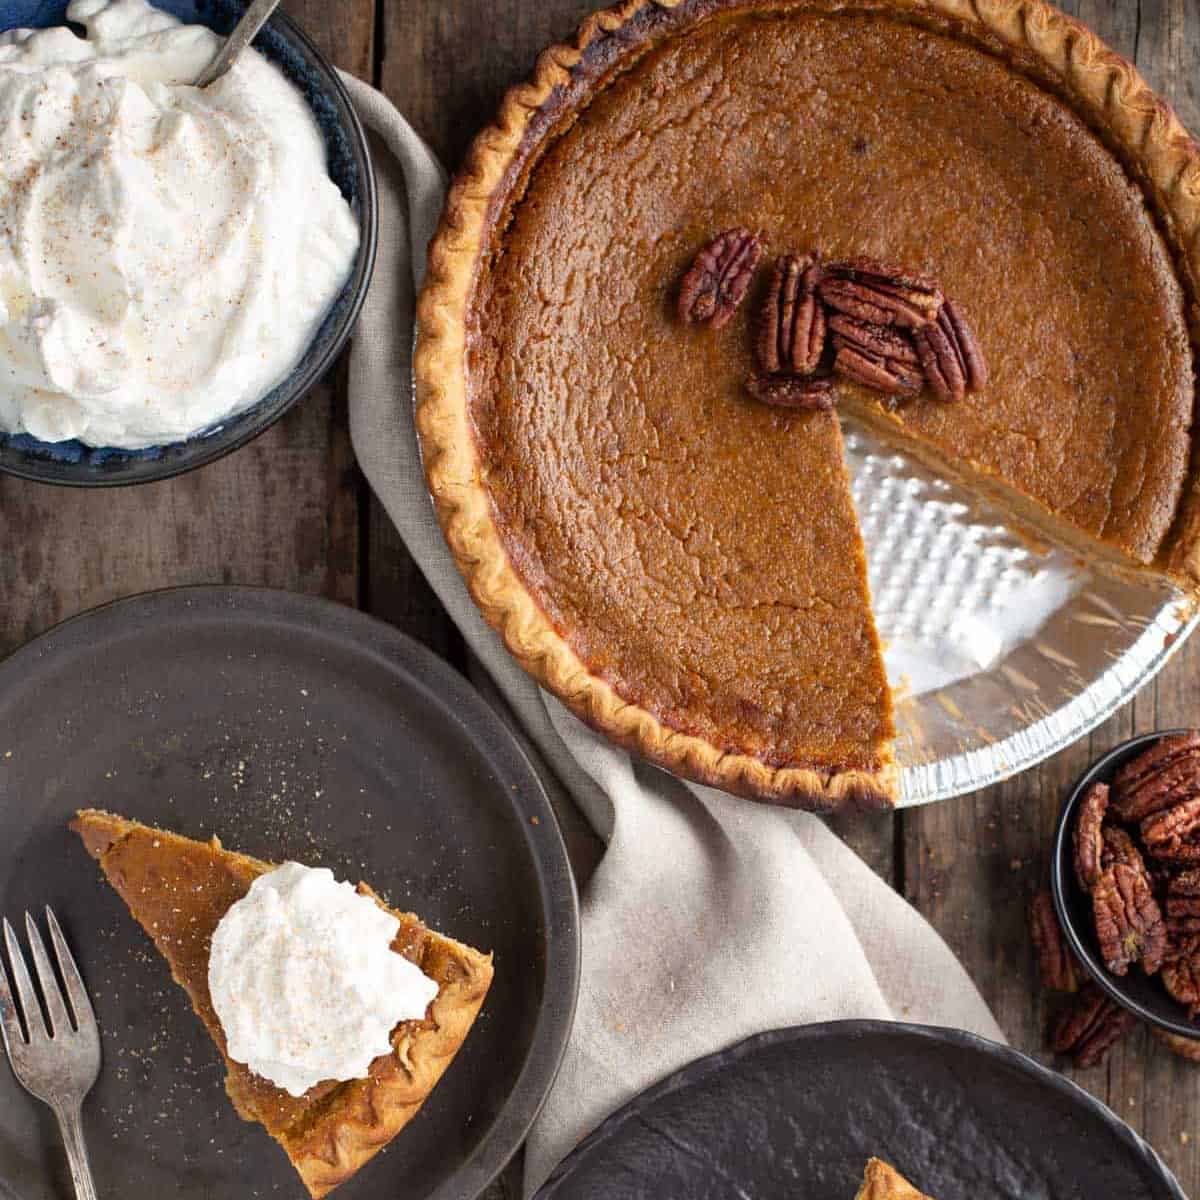 Grilled pumpkin pie and slice with whipped cream.